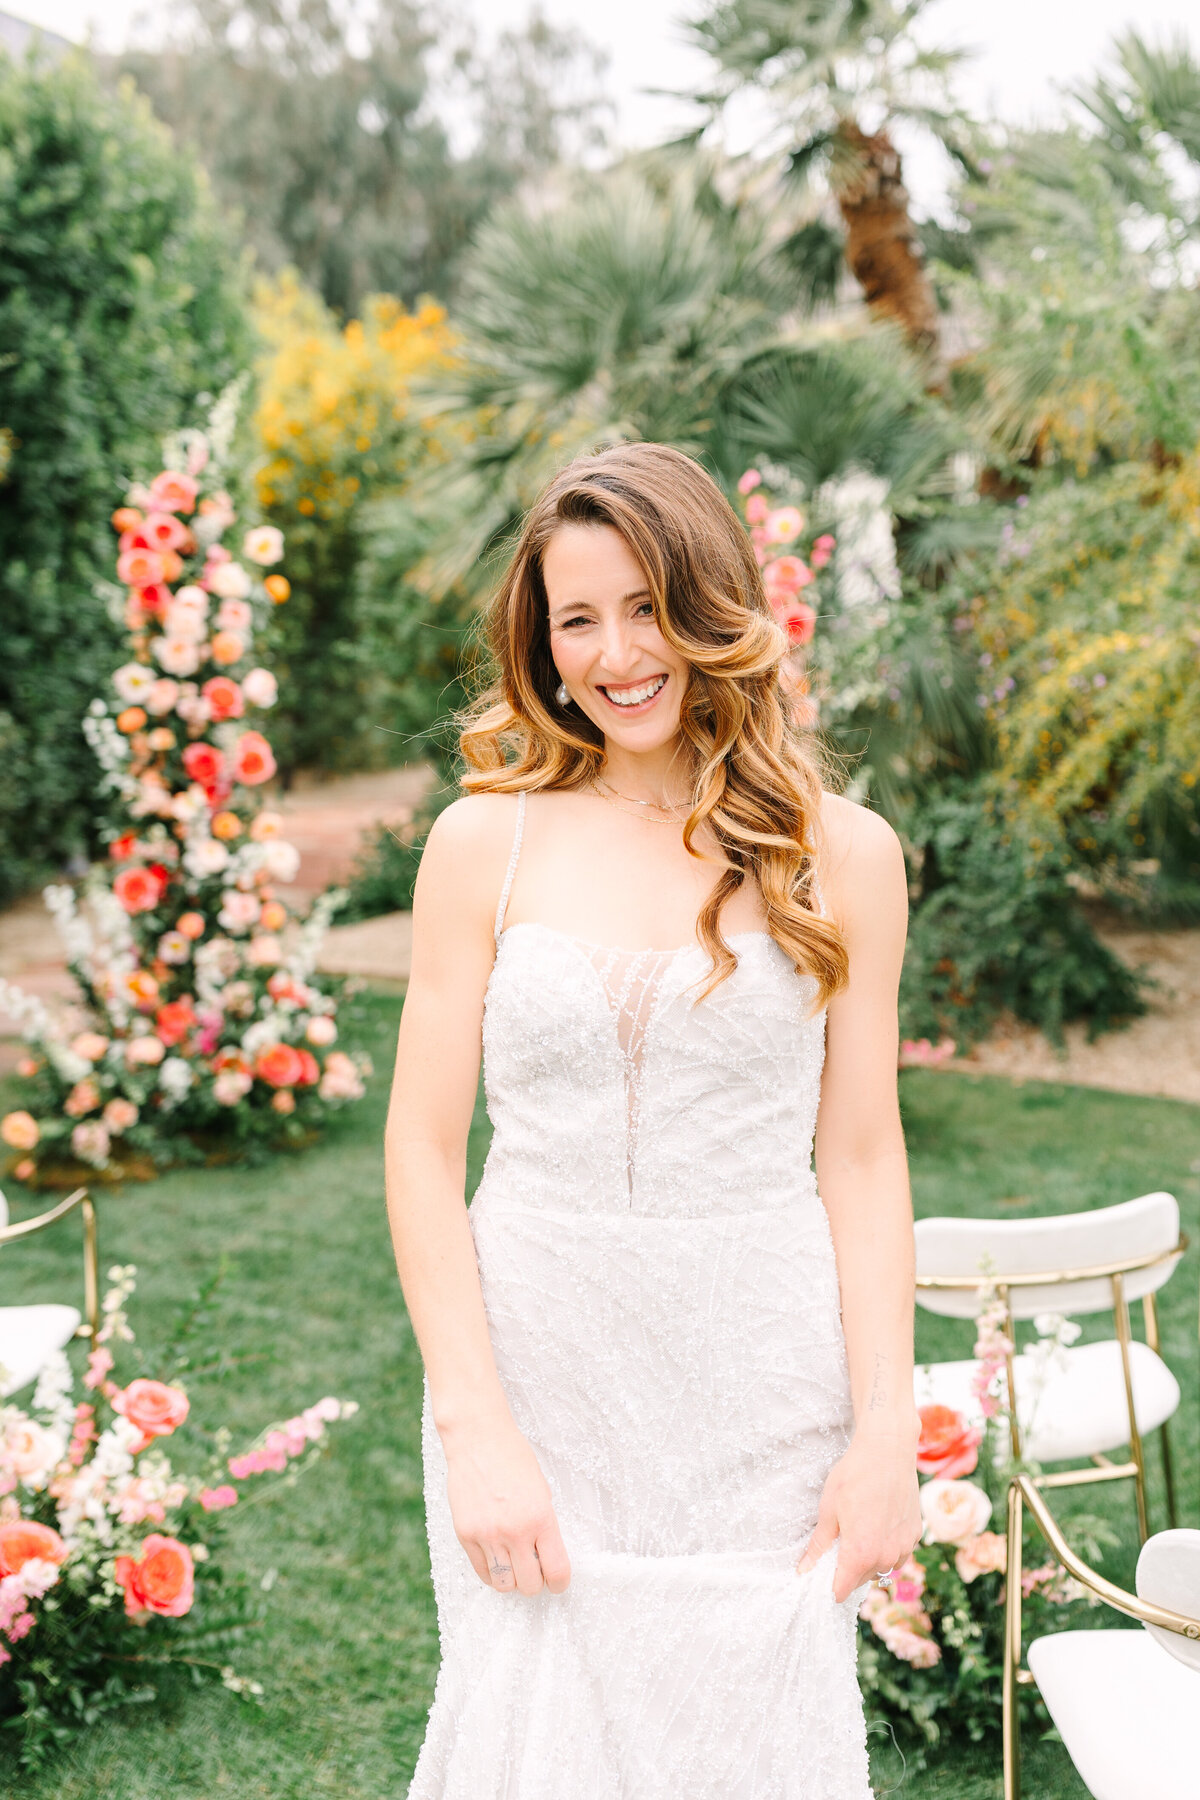 bride smiling in front of floral ceremony arch in outdoors napa wedding venue.